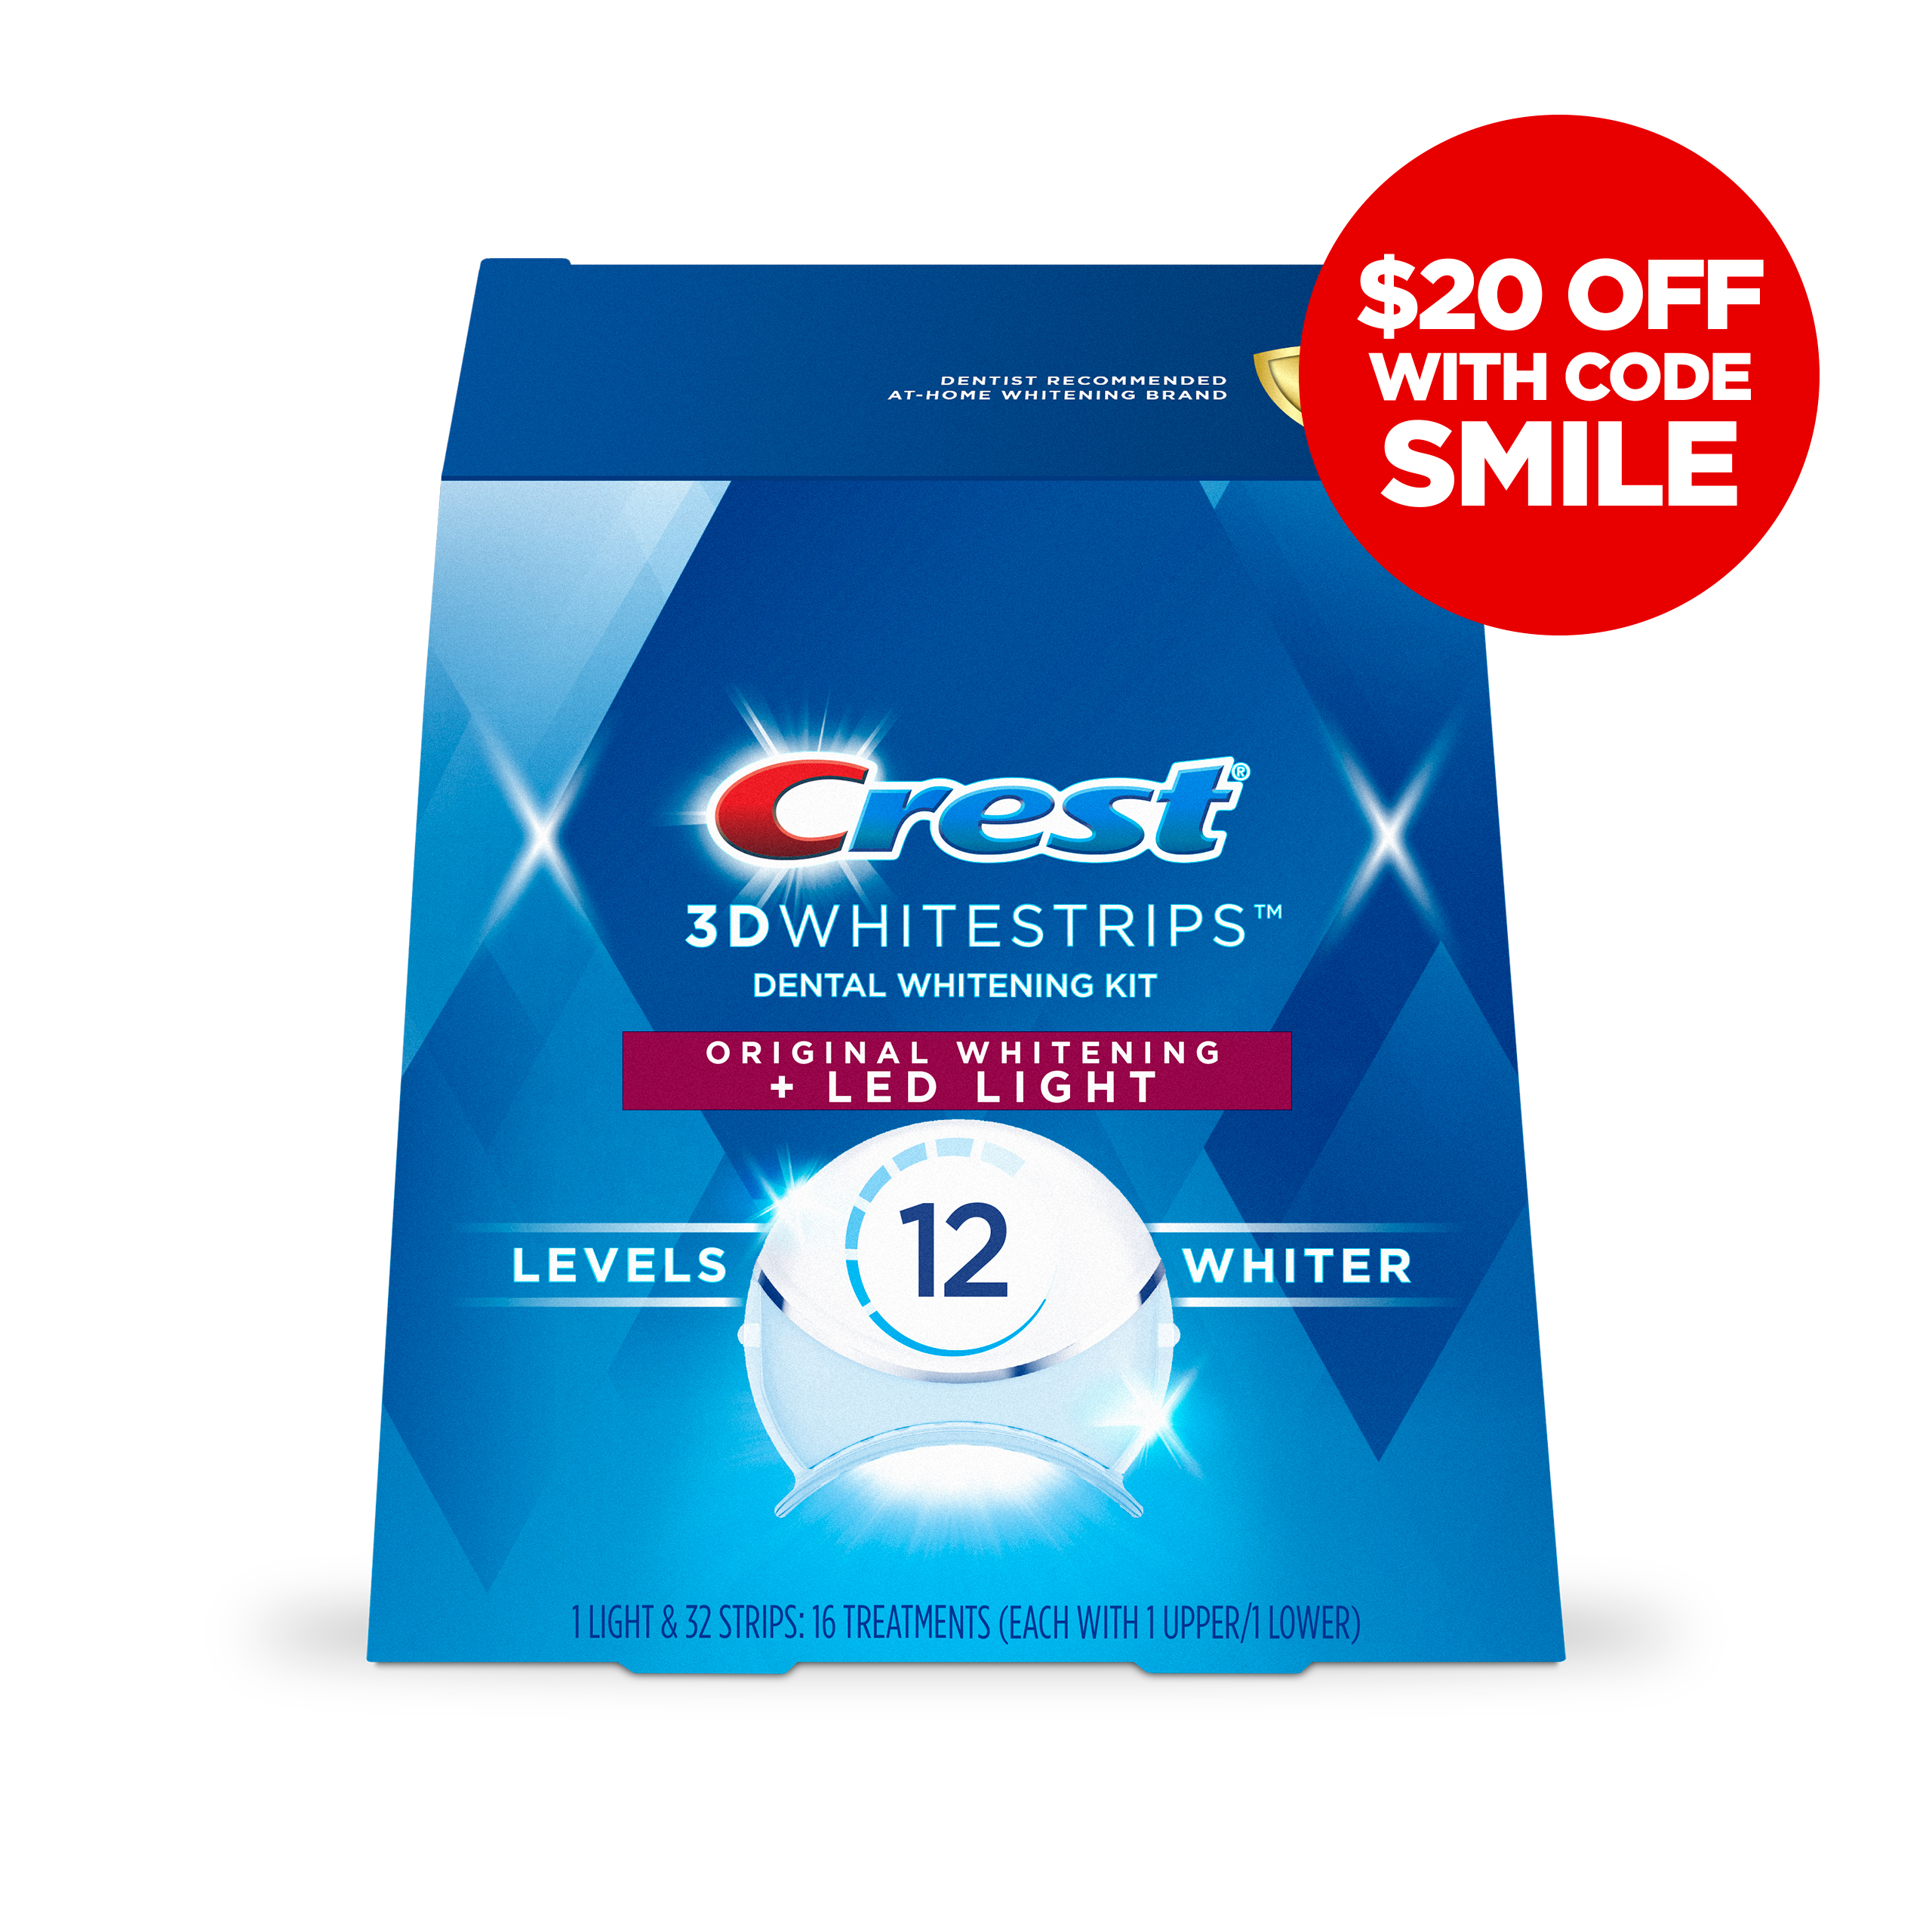 2 Crest 3DWhitestrips Original + LED Light packs - each include 16 treatments or 32 total strips + a LED Light. Use code BOGO to save!
